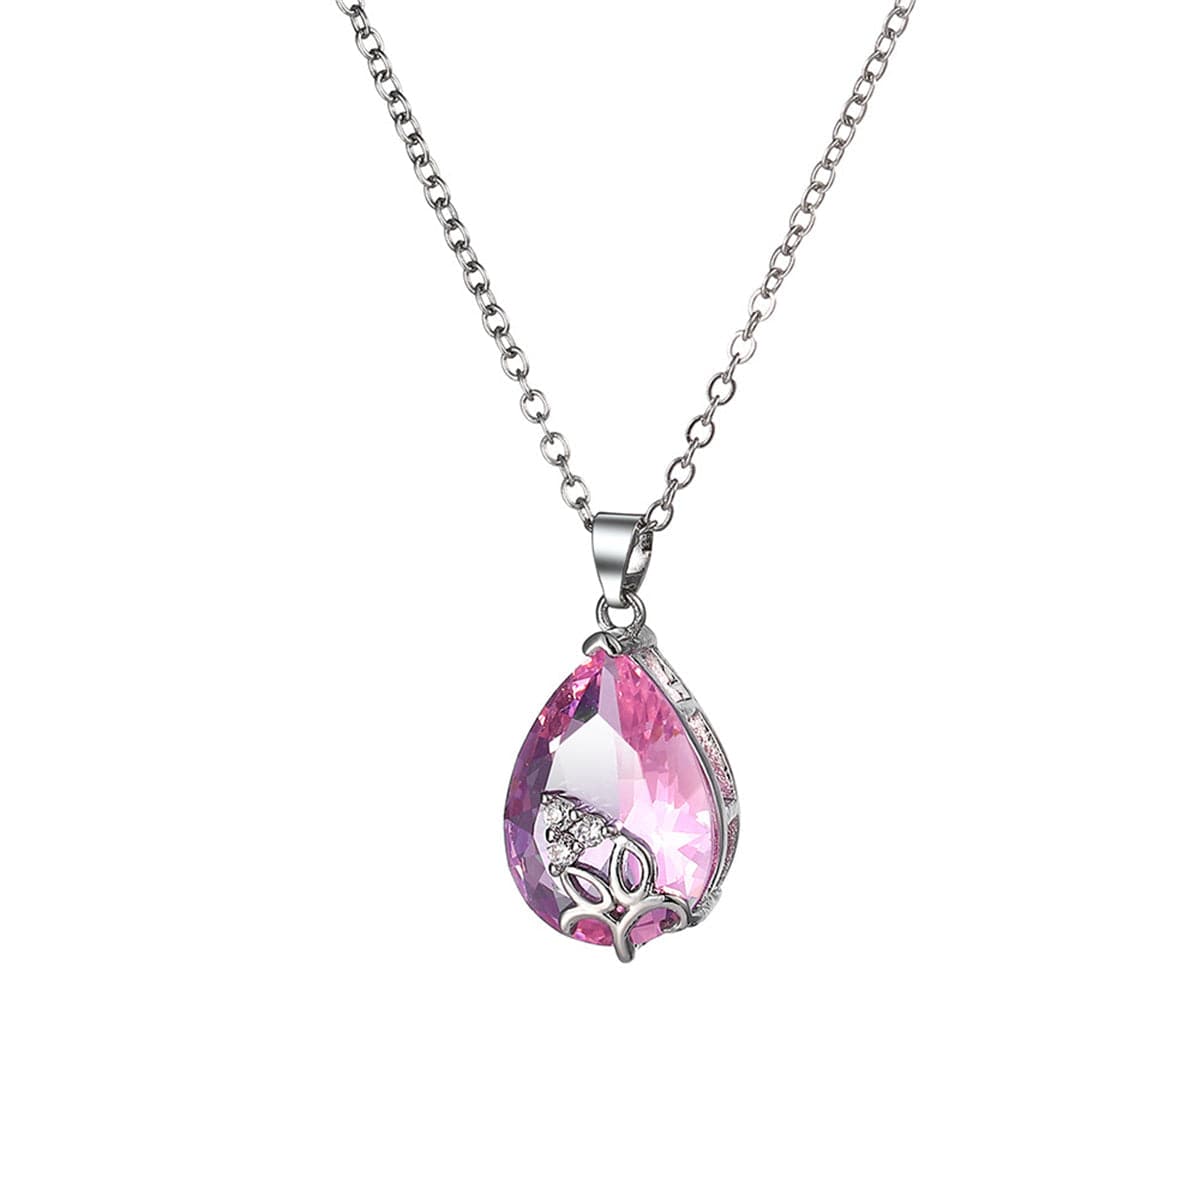 Pink Crystal & Silver-Plated Teardrop Pendant Necklace